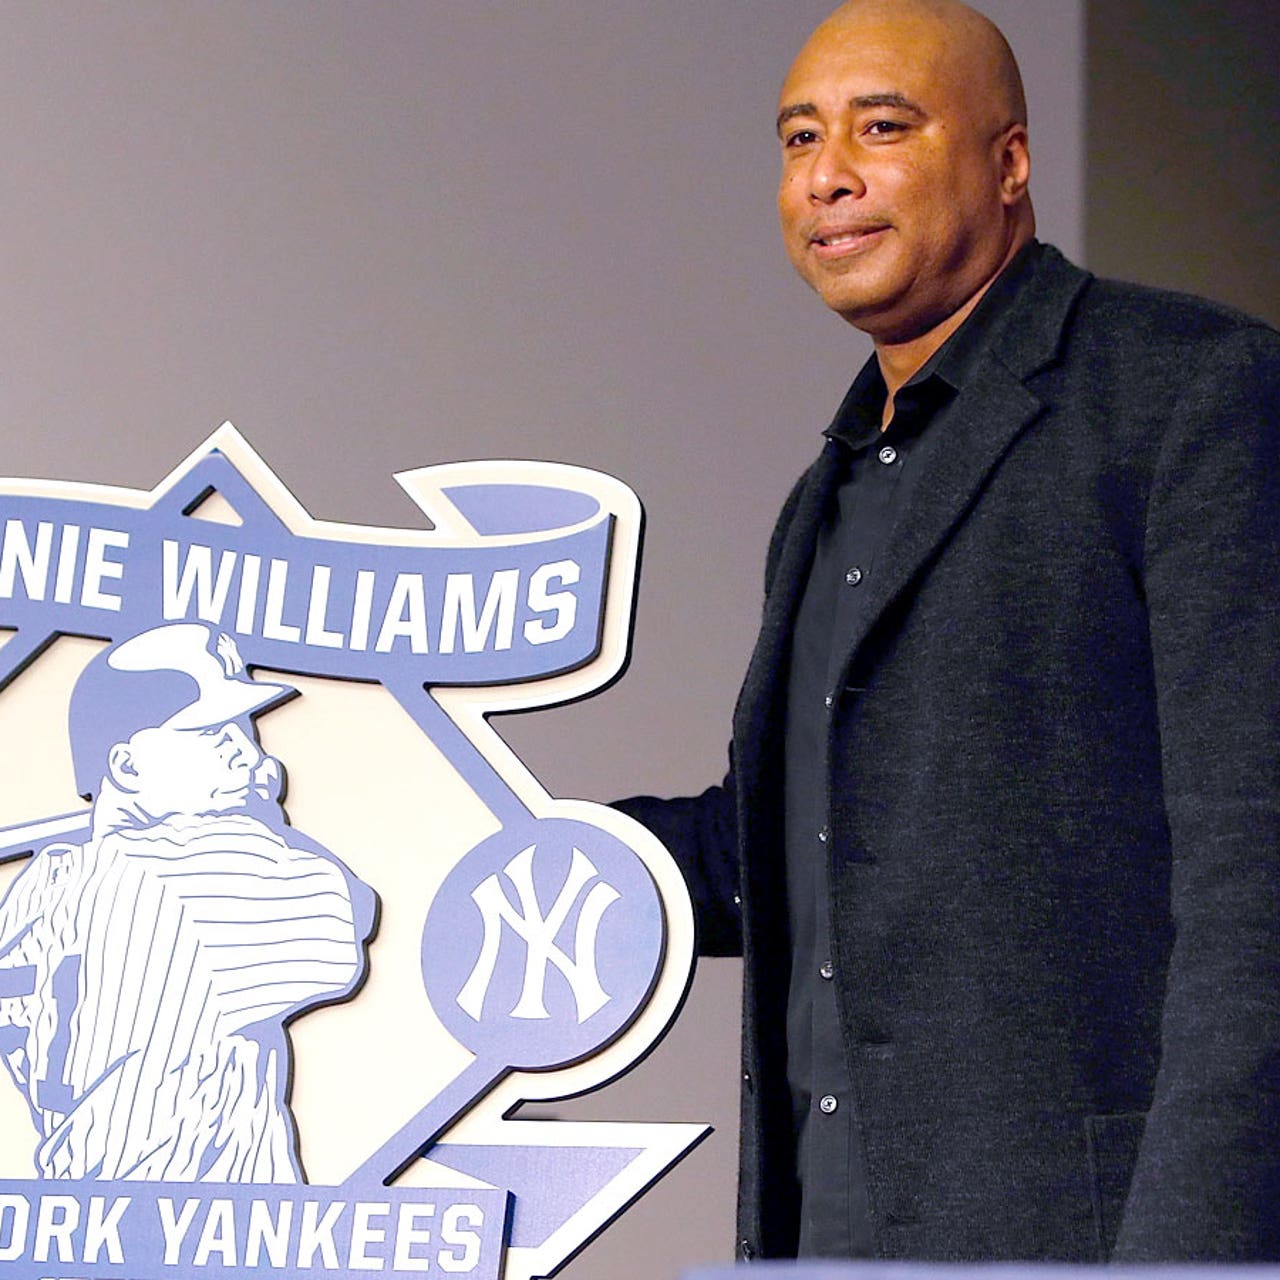 Bernie Williams officially retires from Yankees, 9 years after final game